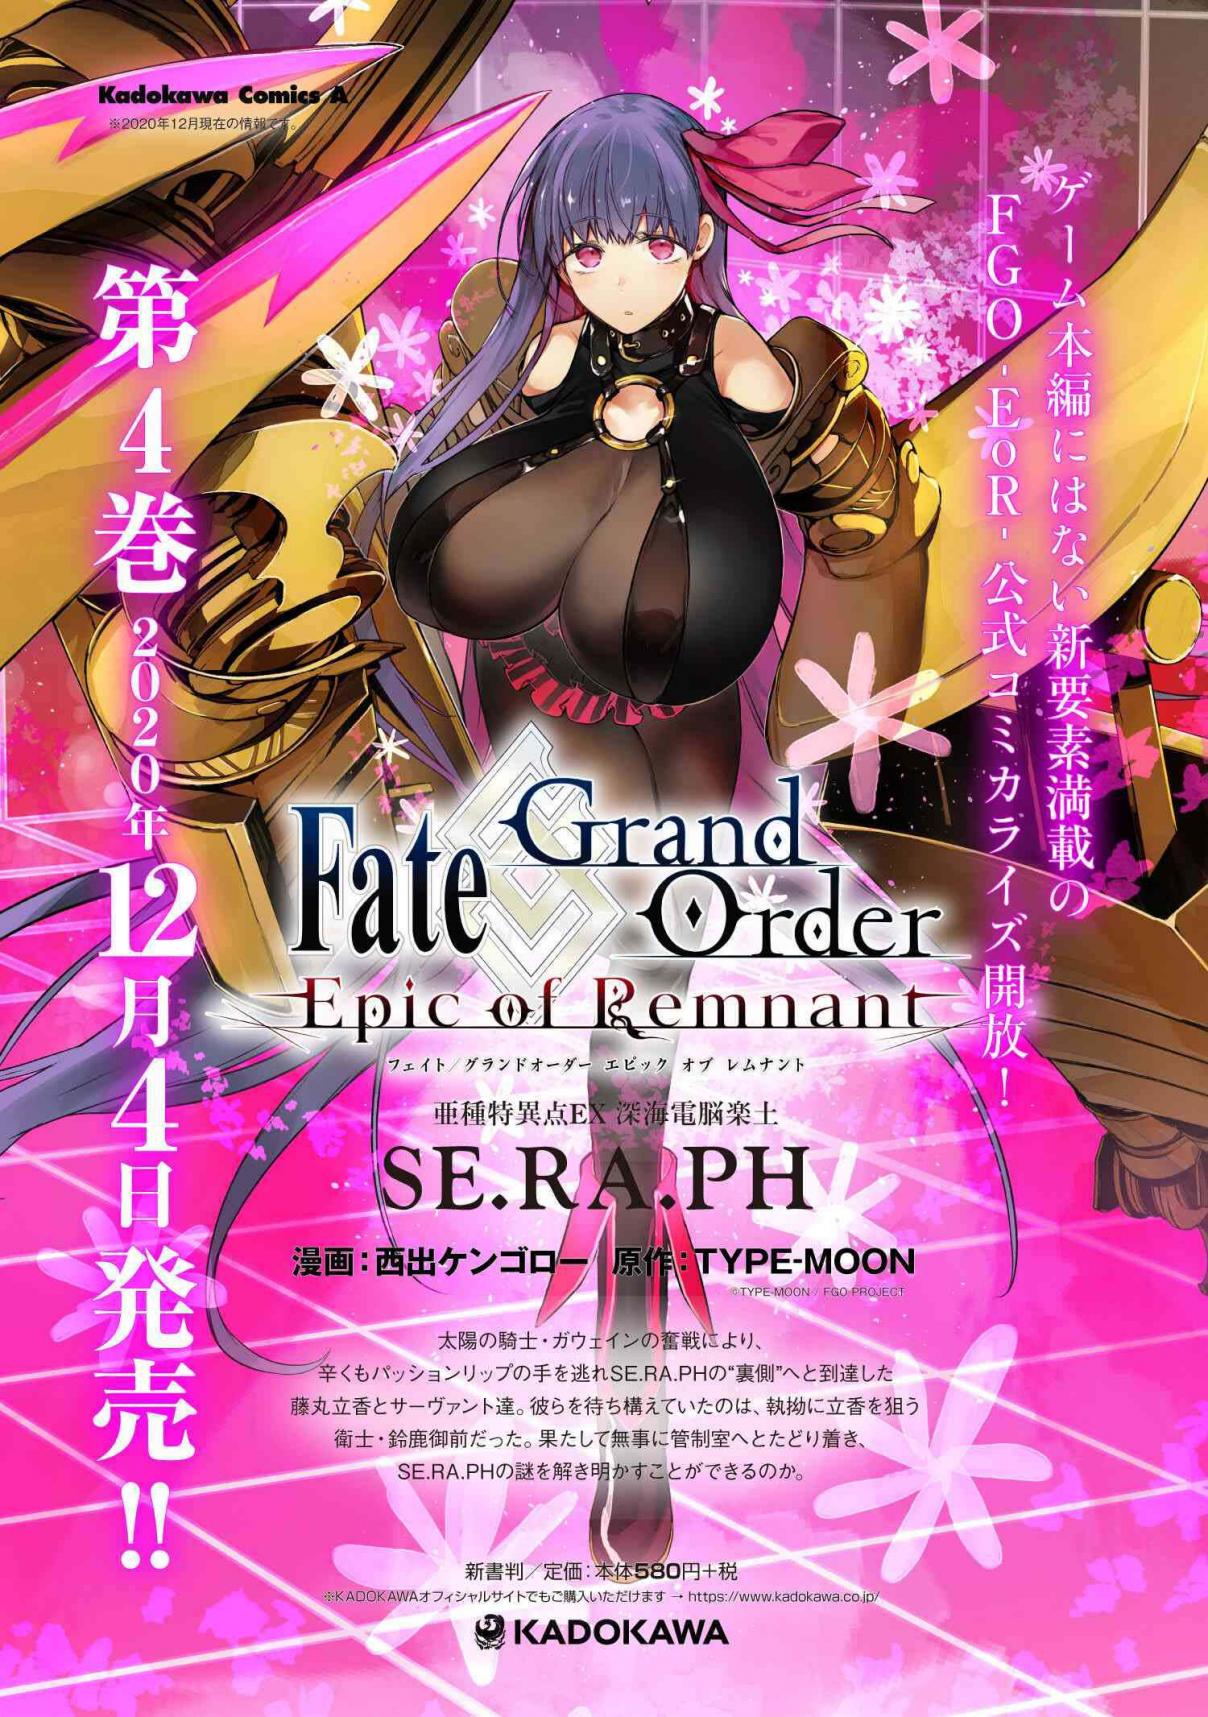 Fate/Grand Order -Epic of Remnant- Deep Sea Cyber-Paradise, SE.RA.PH 22.1